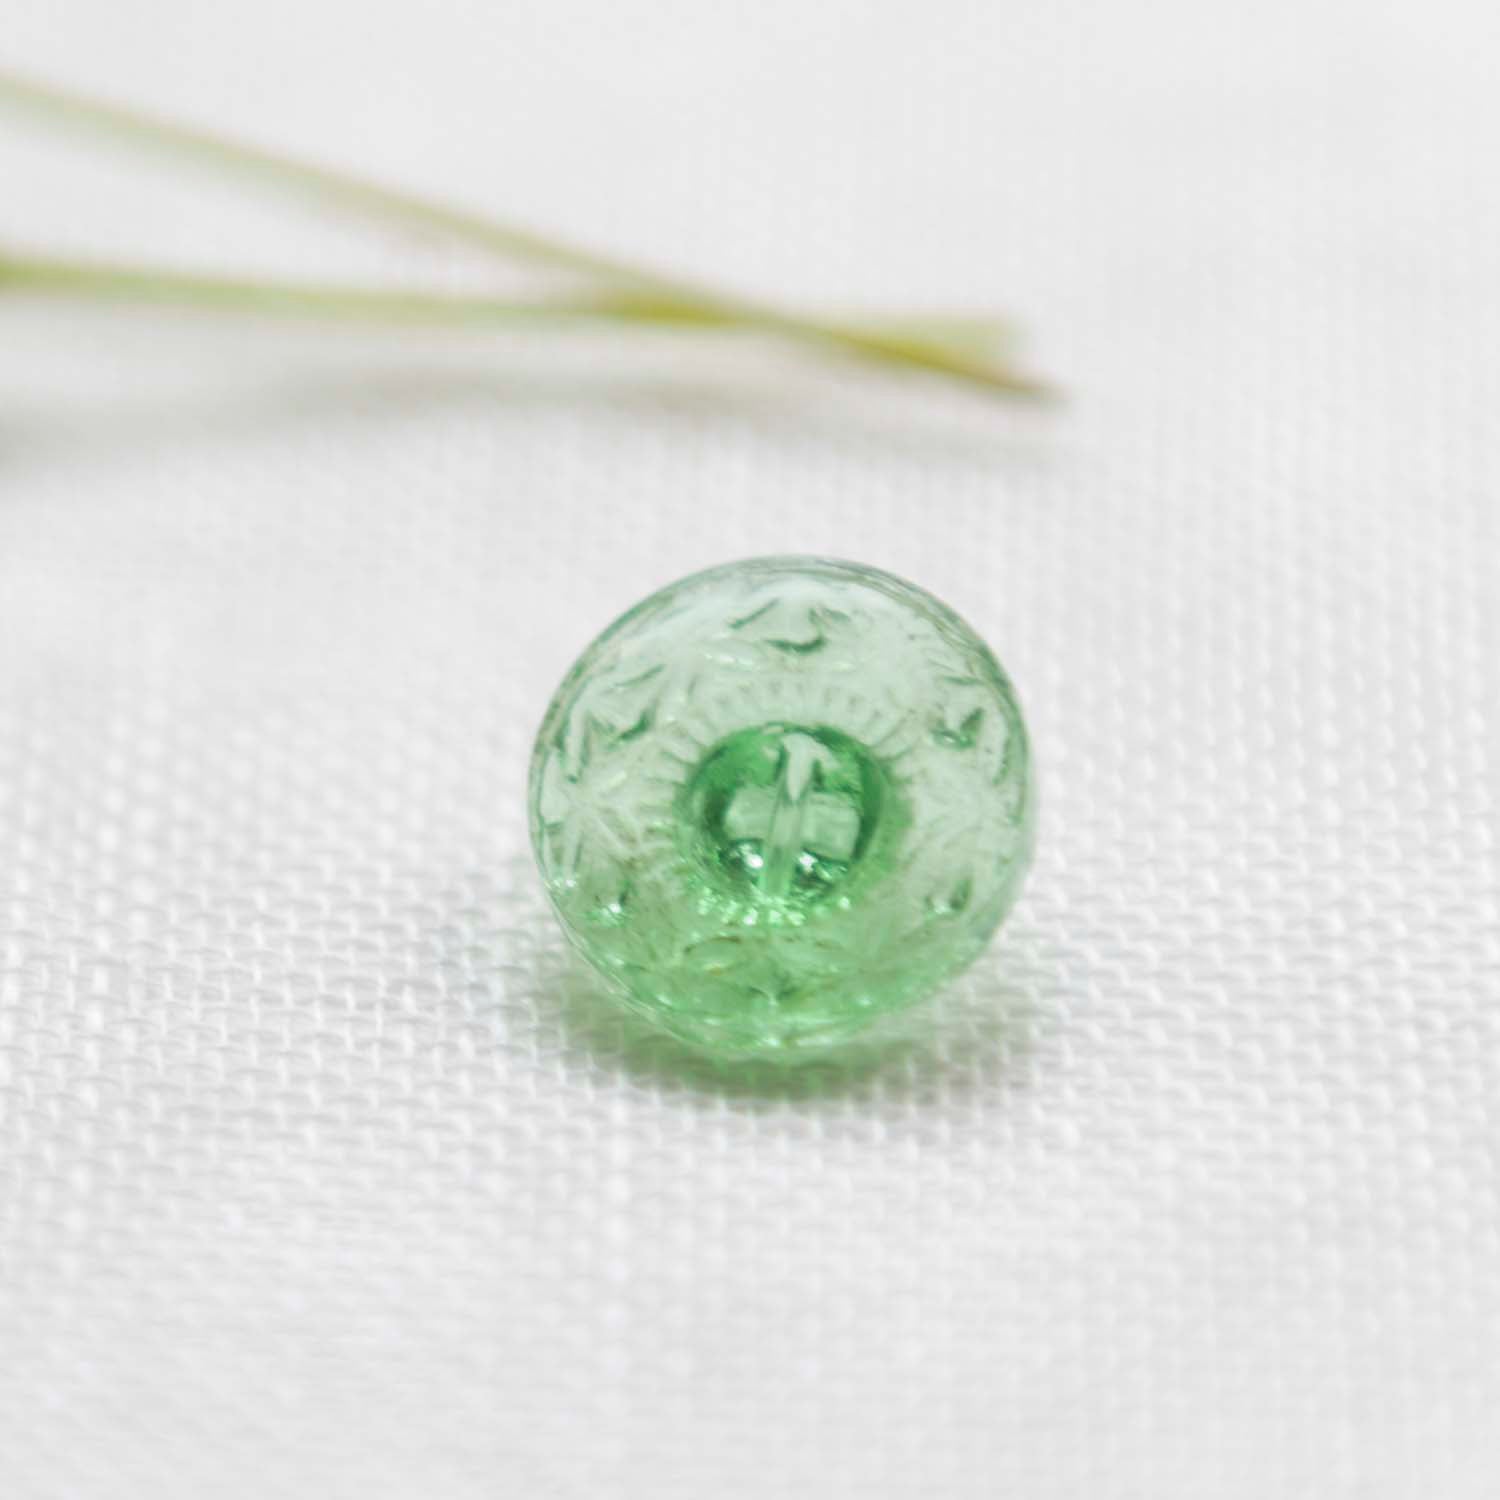 【Vintage】 reverse patterned green glass button